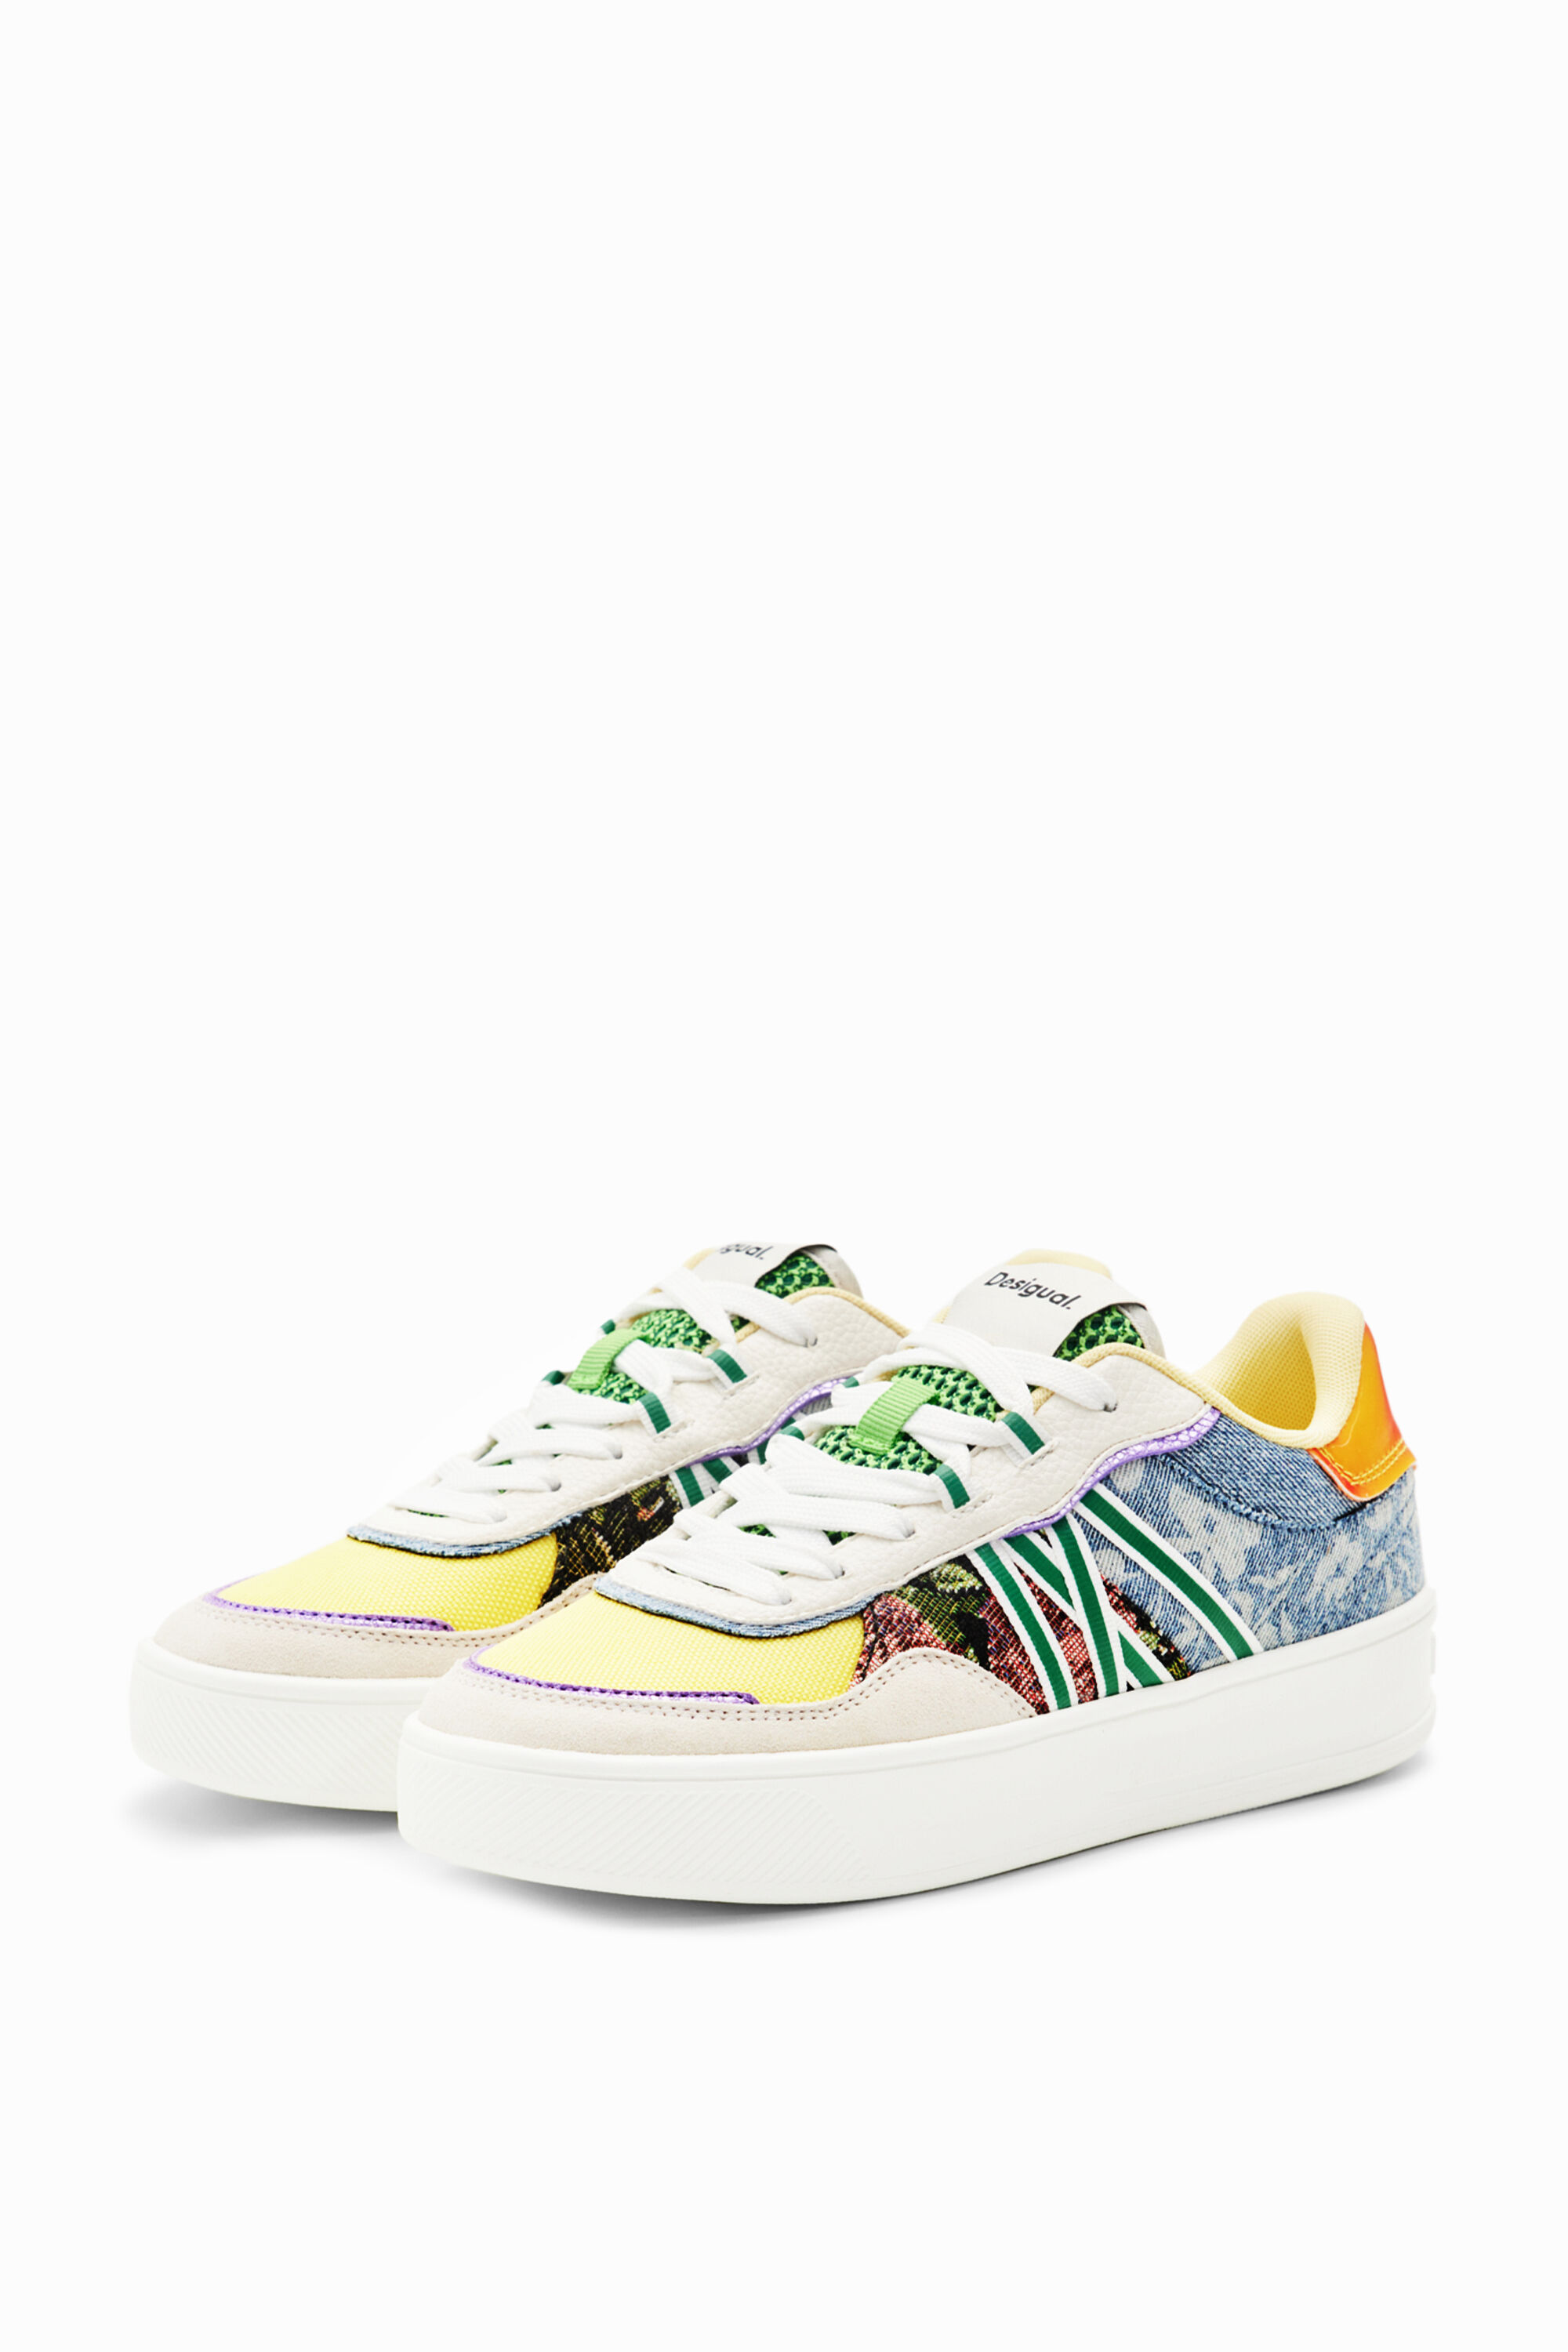 Patchwork platform sneakers - MATERIAL FINISHES - 37